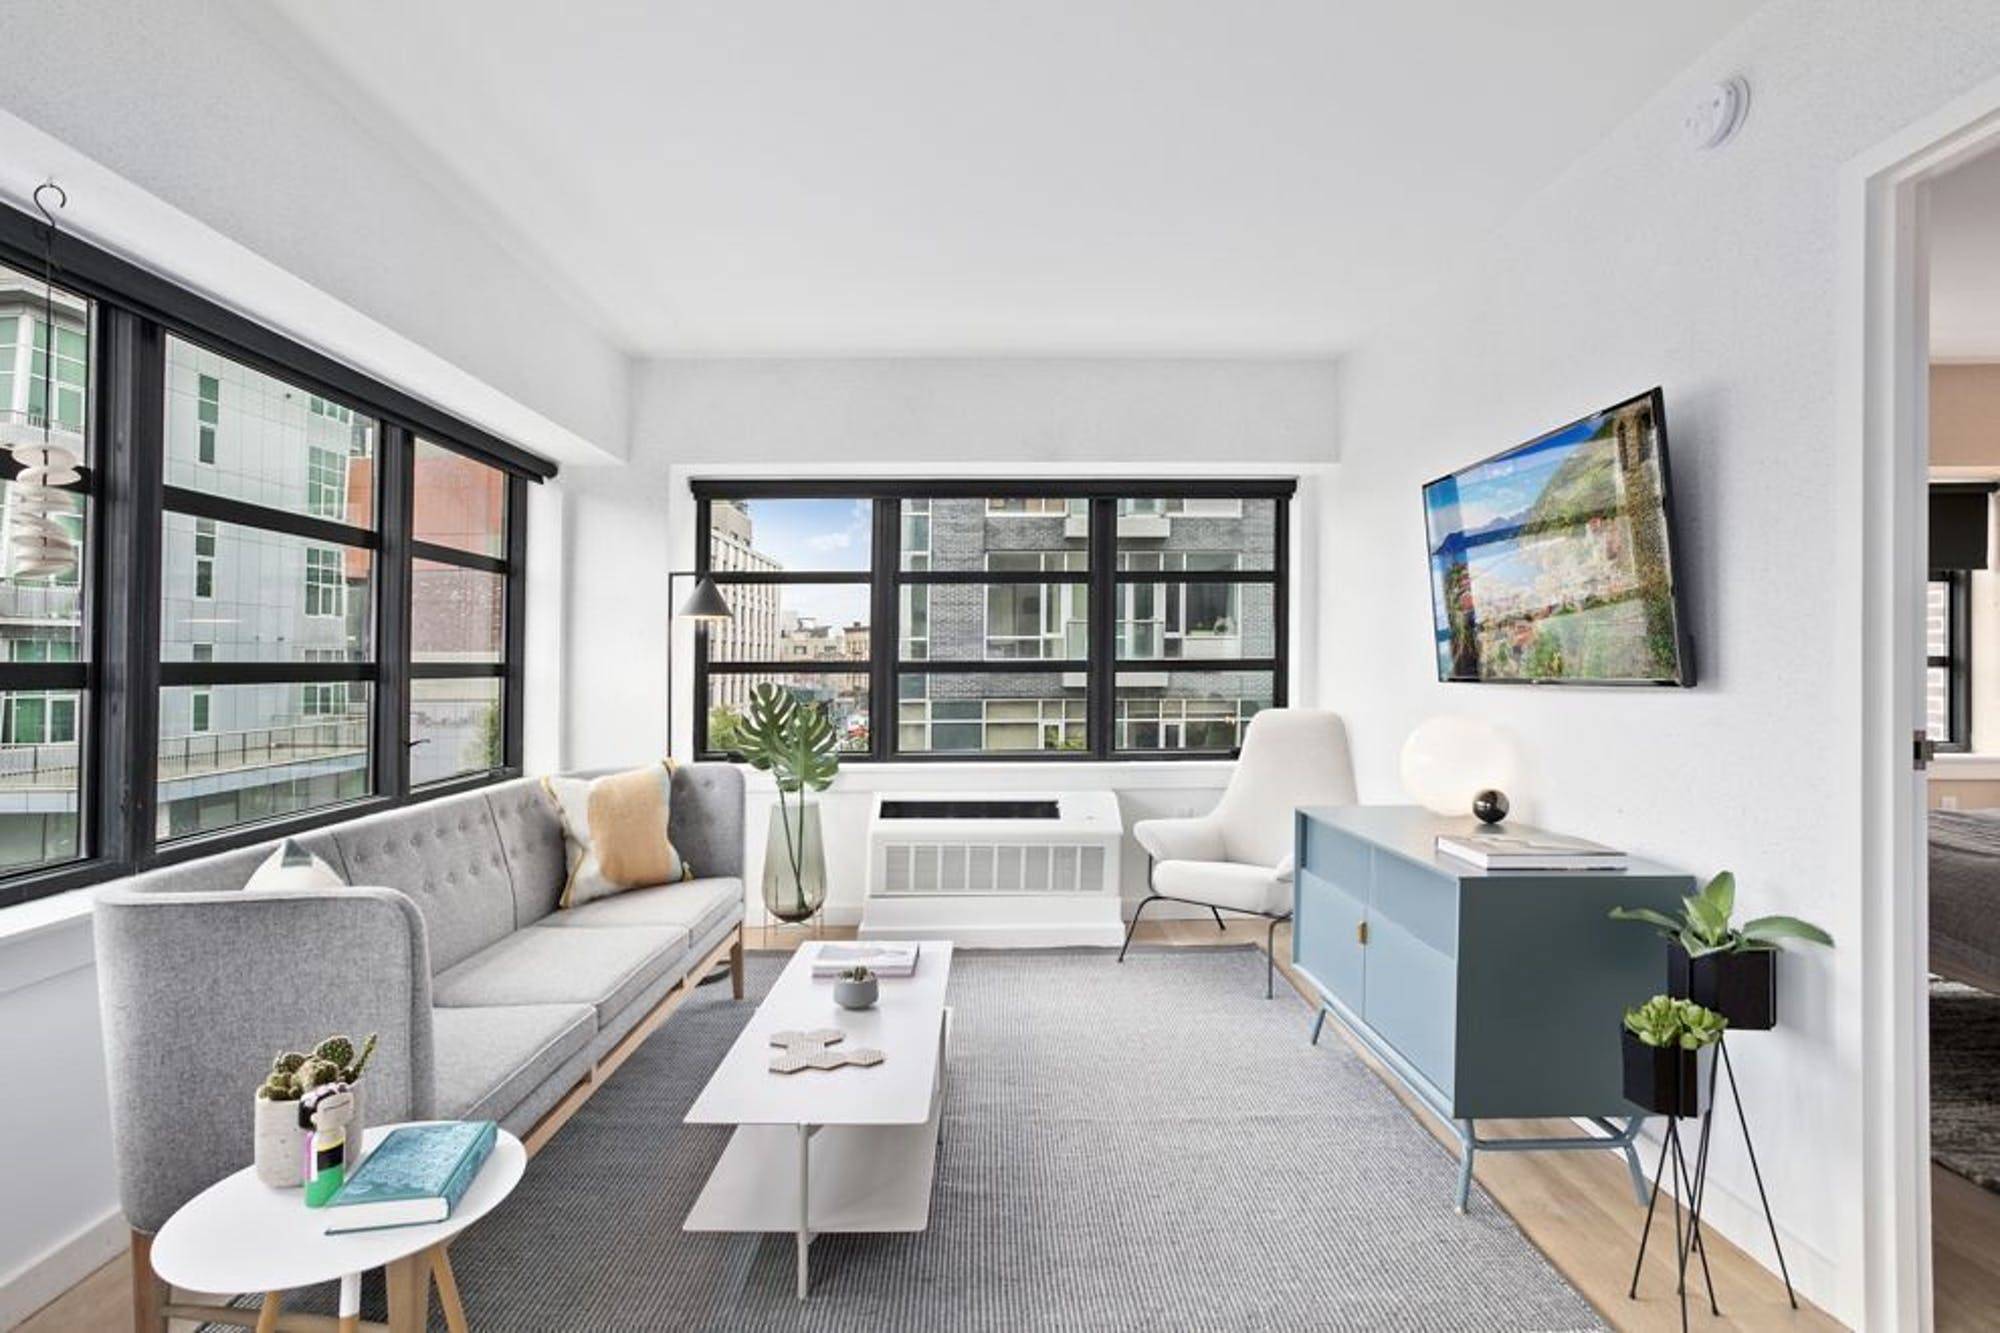 Welcome to 66 Ainslie 66 Ainslie Street is an incredible opportunity to enjoy the comforts of modern living and reside in one of the most sought after neighborhoods in Brooklyn.